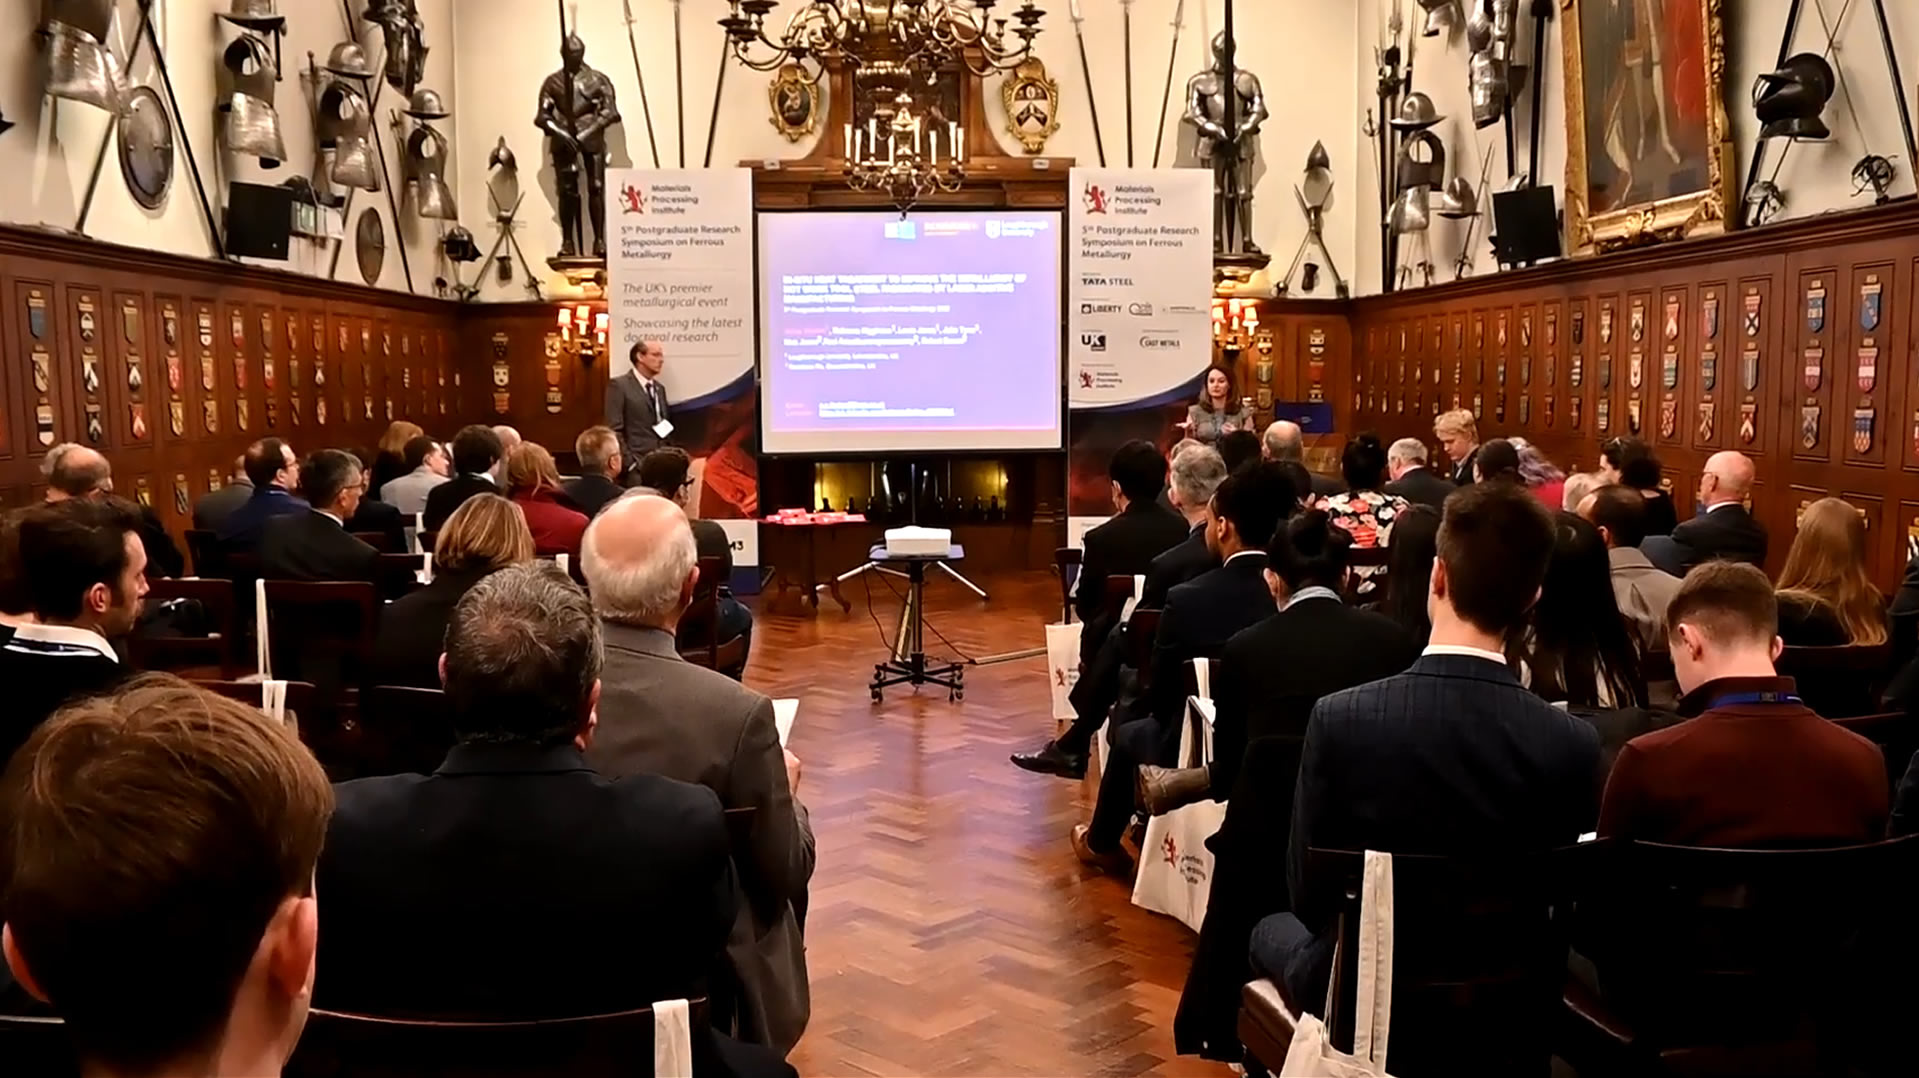 The 5th Postgraduate Research Symposium on Ferrous Metallurgy 2022 at the Armourers' Hall, Armourers & Brasiers' Company, London